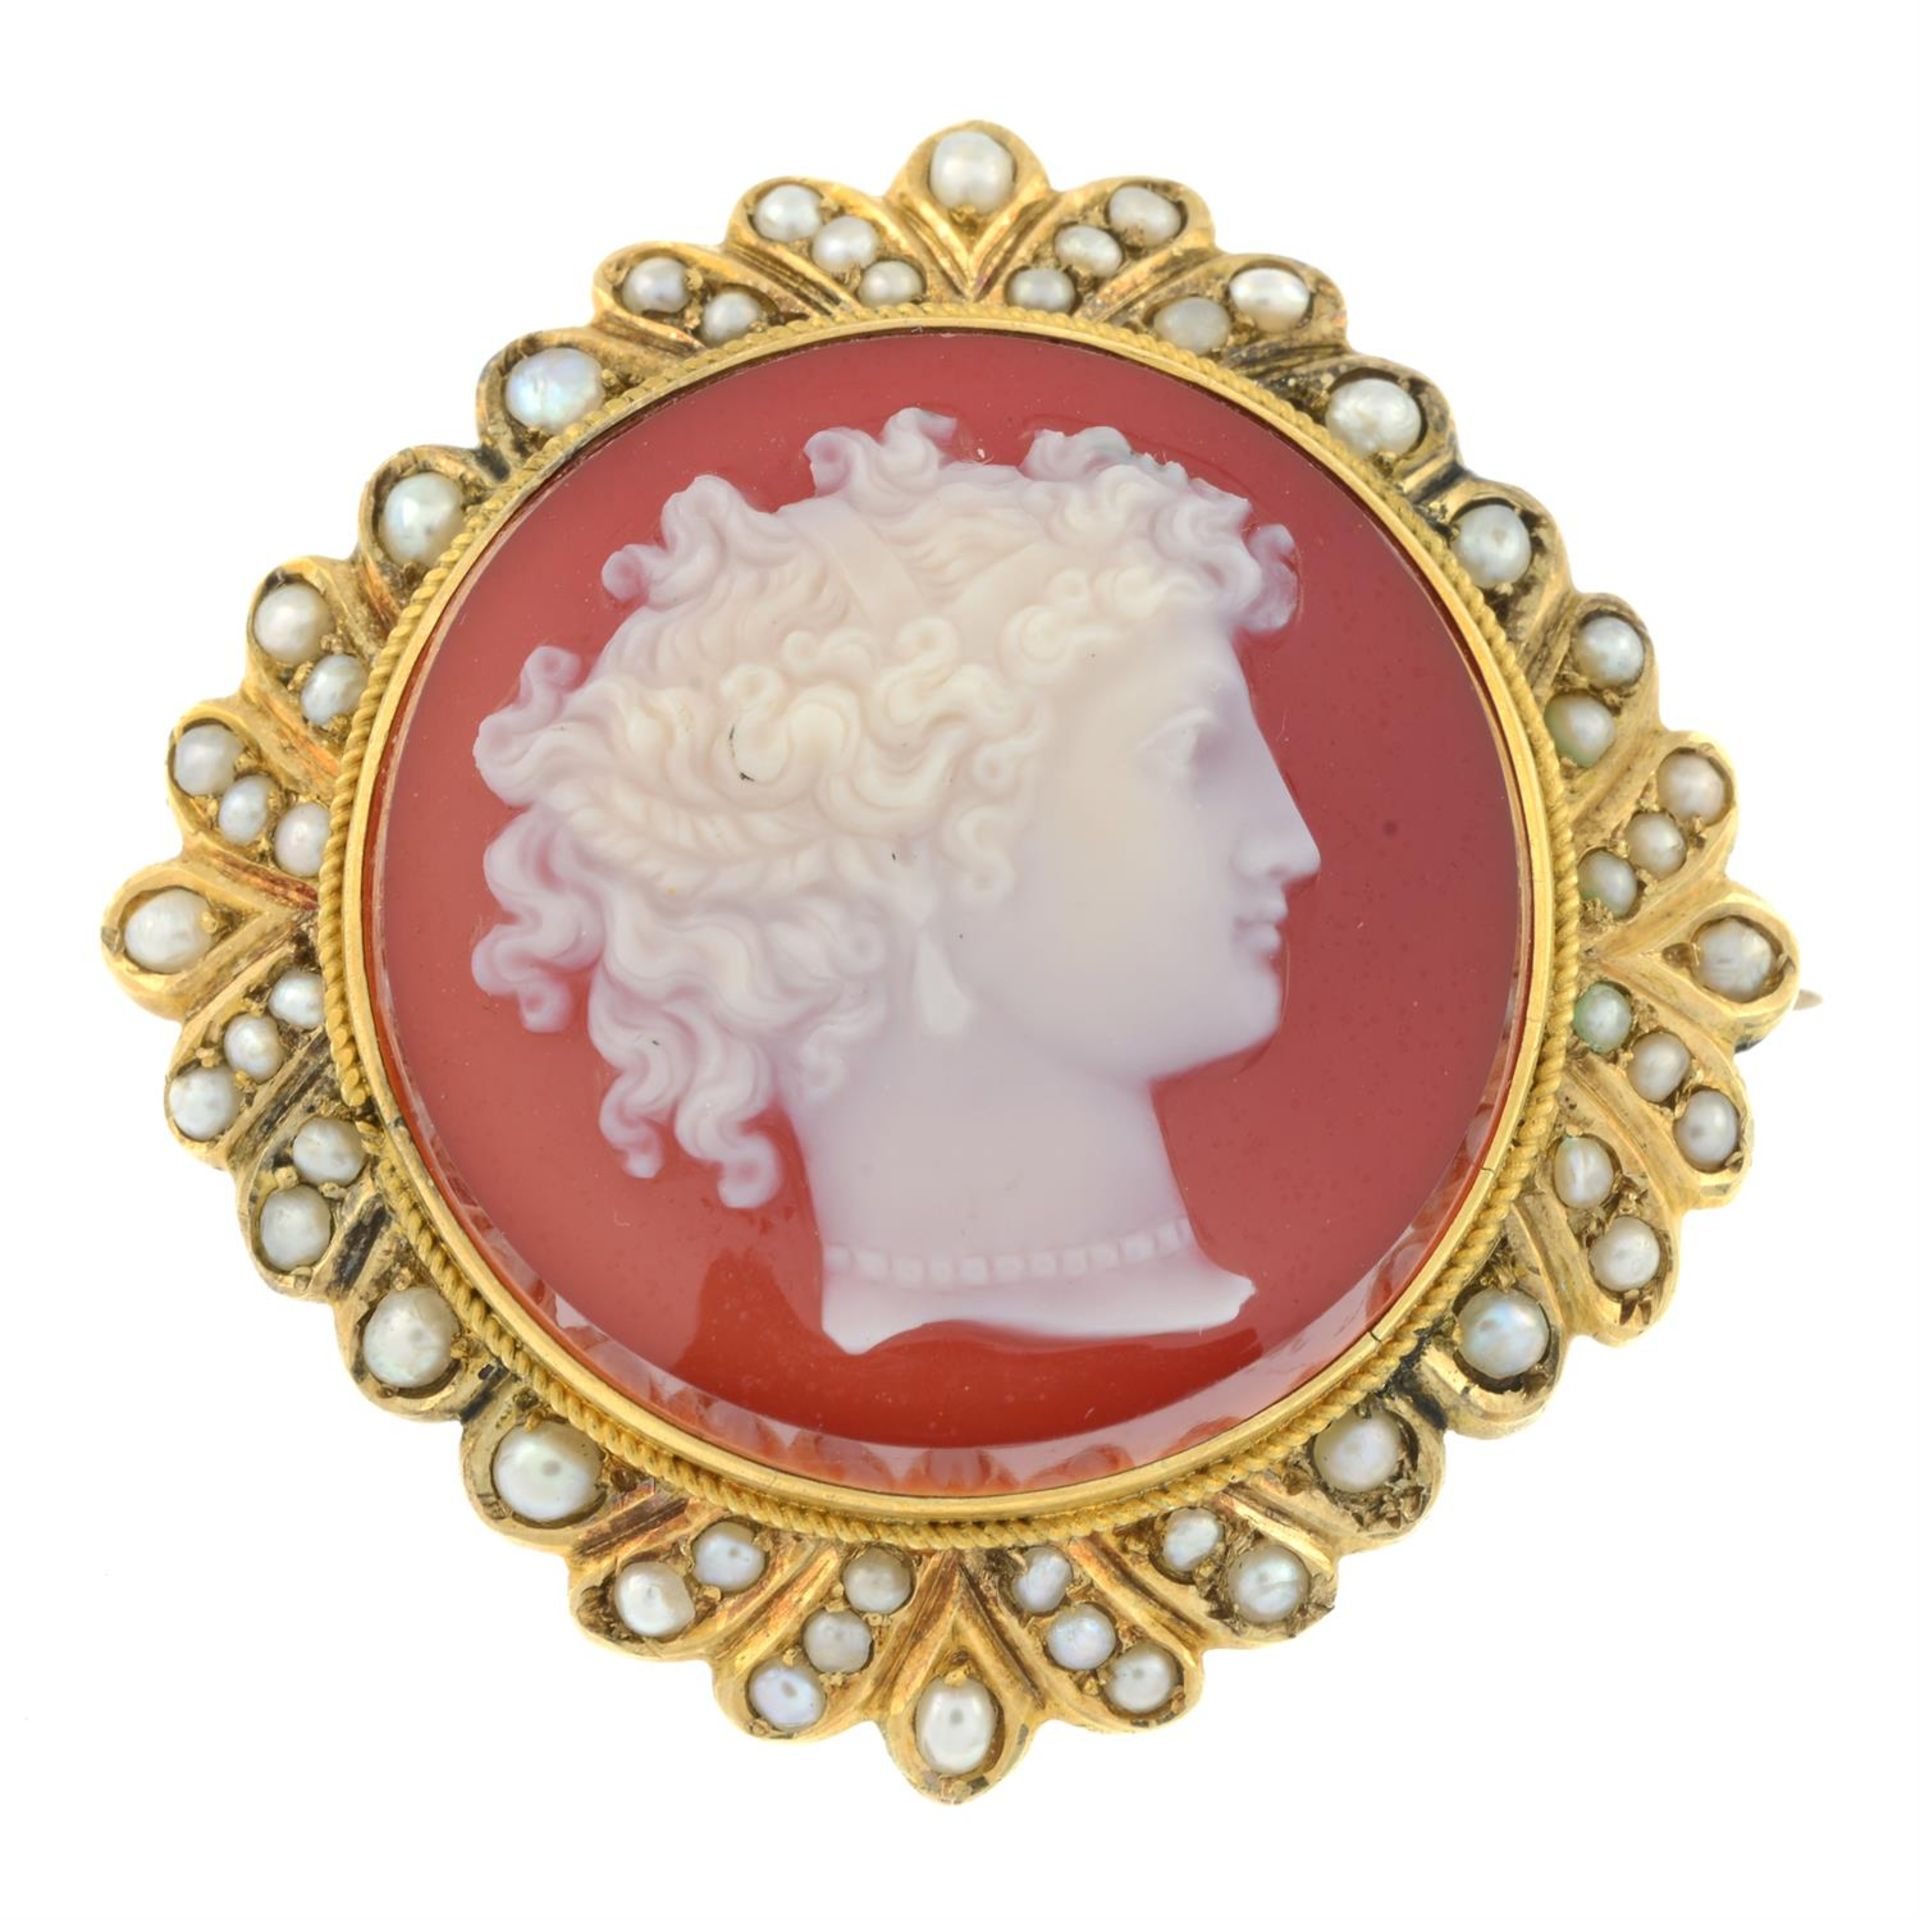 A late 19th century sardonyx cameo brooch, with split pearl surround. - Image 2 of 4